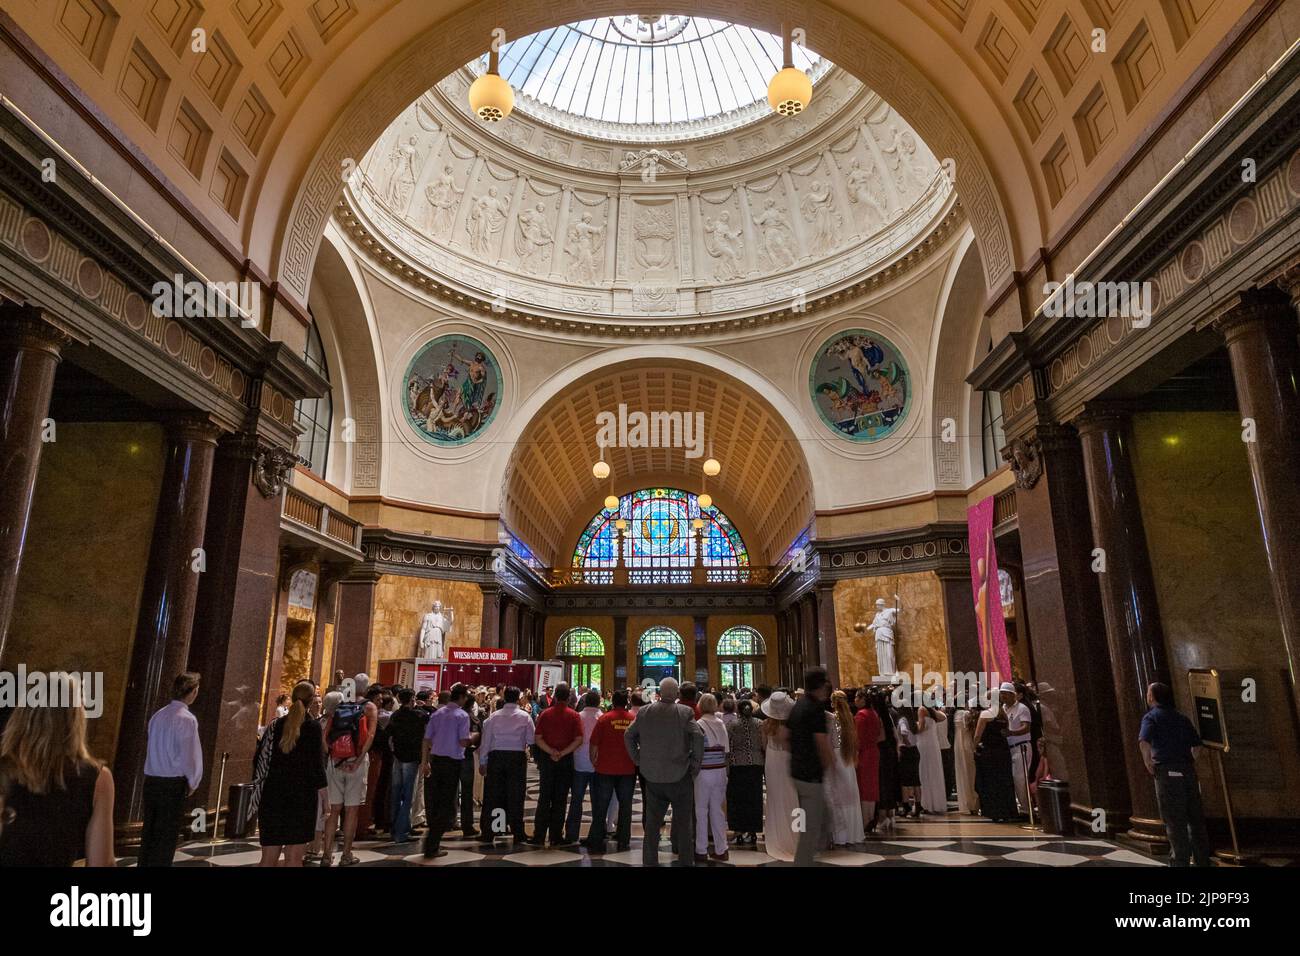 Great view inside the Wiesbaden's Kurhaus (spa house) in Germany. People gathered in the foyer, under the dome, supported by piers with white statues... Stock Photo